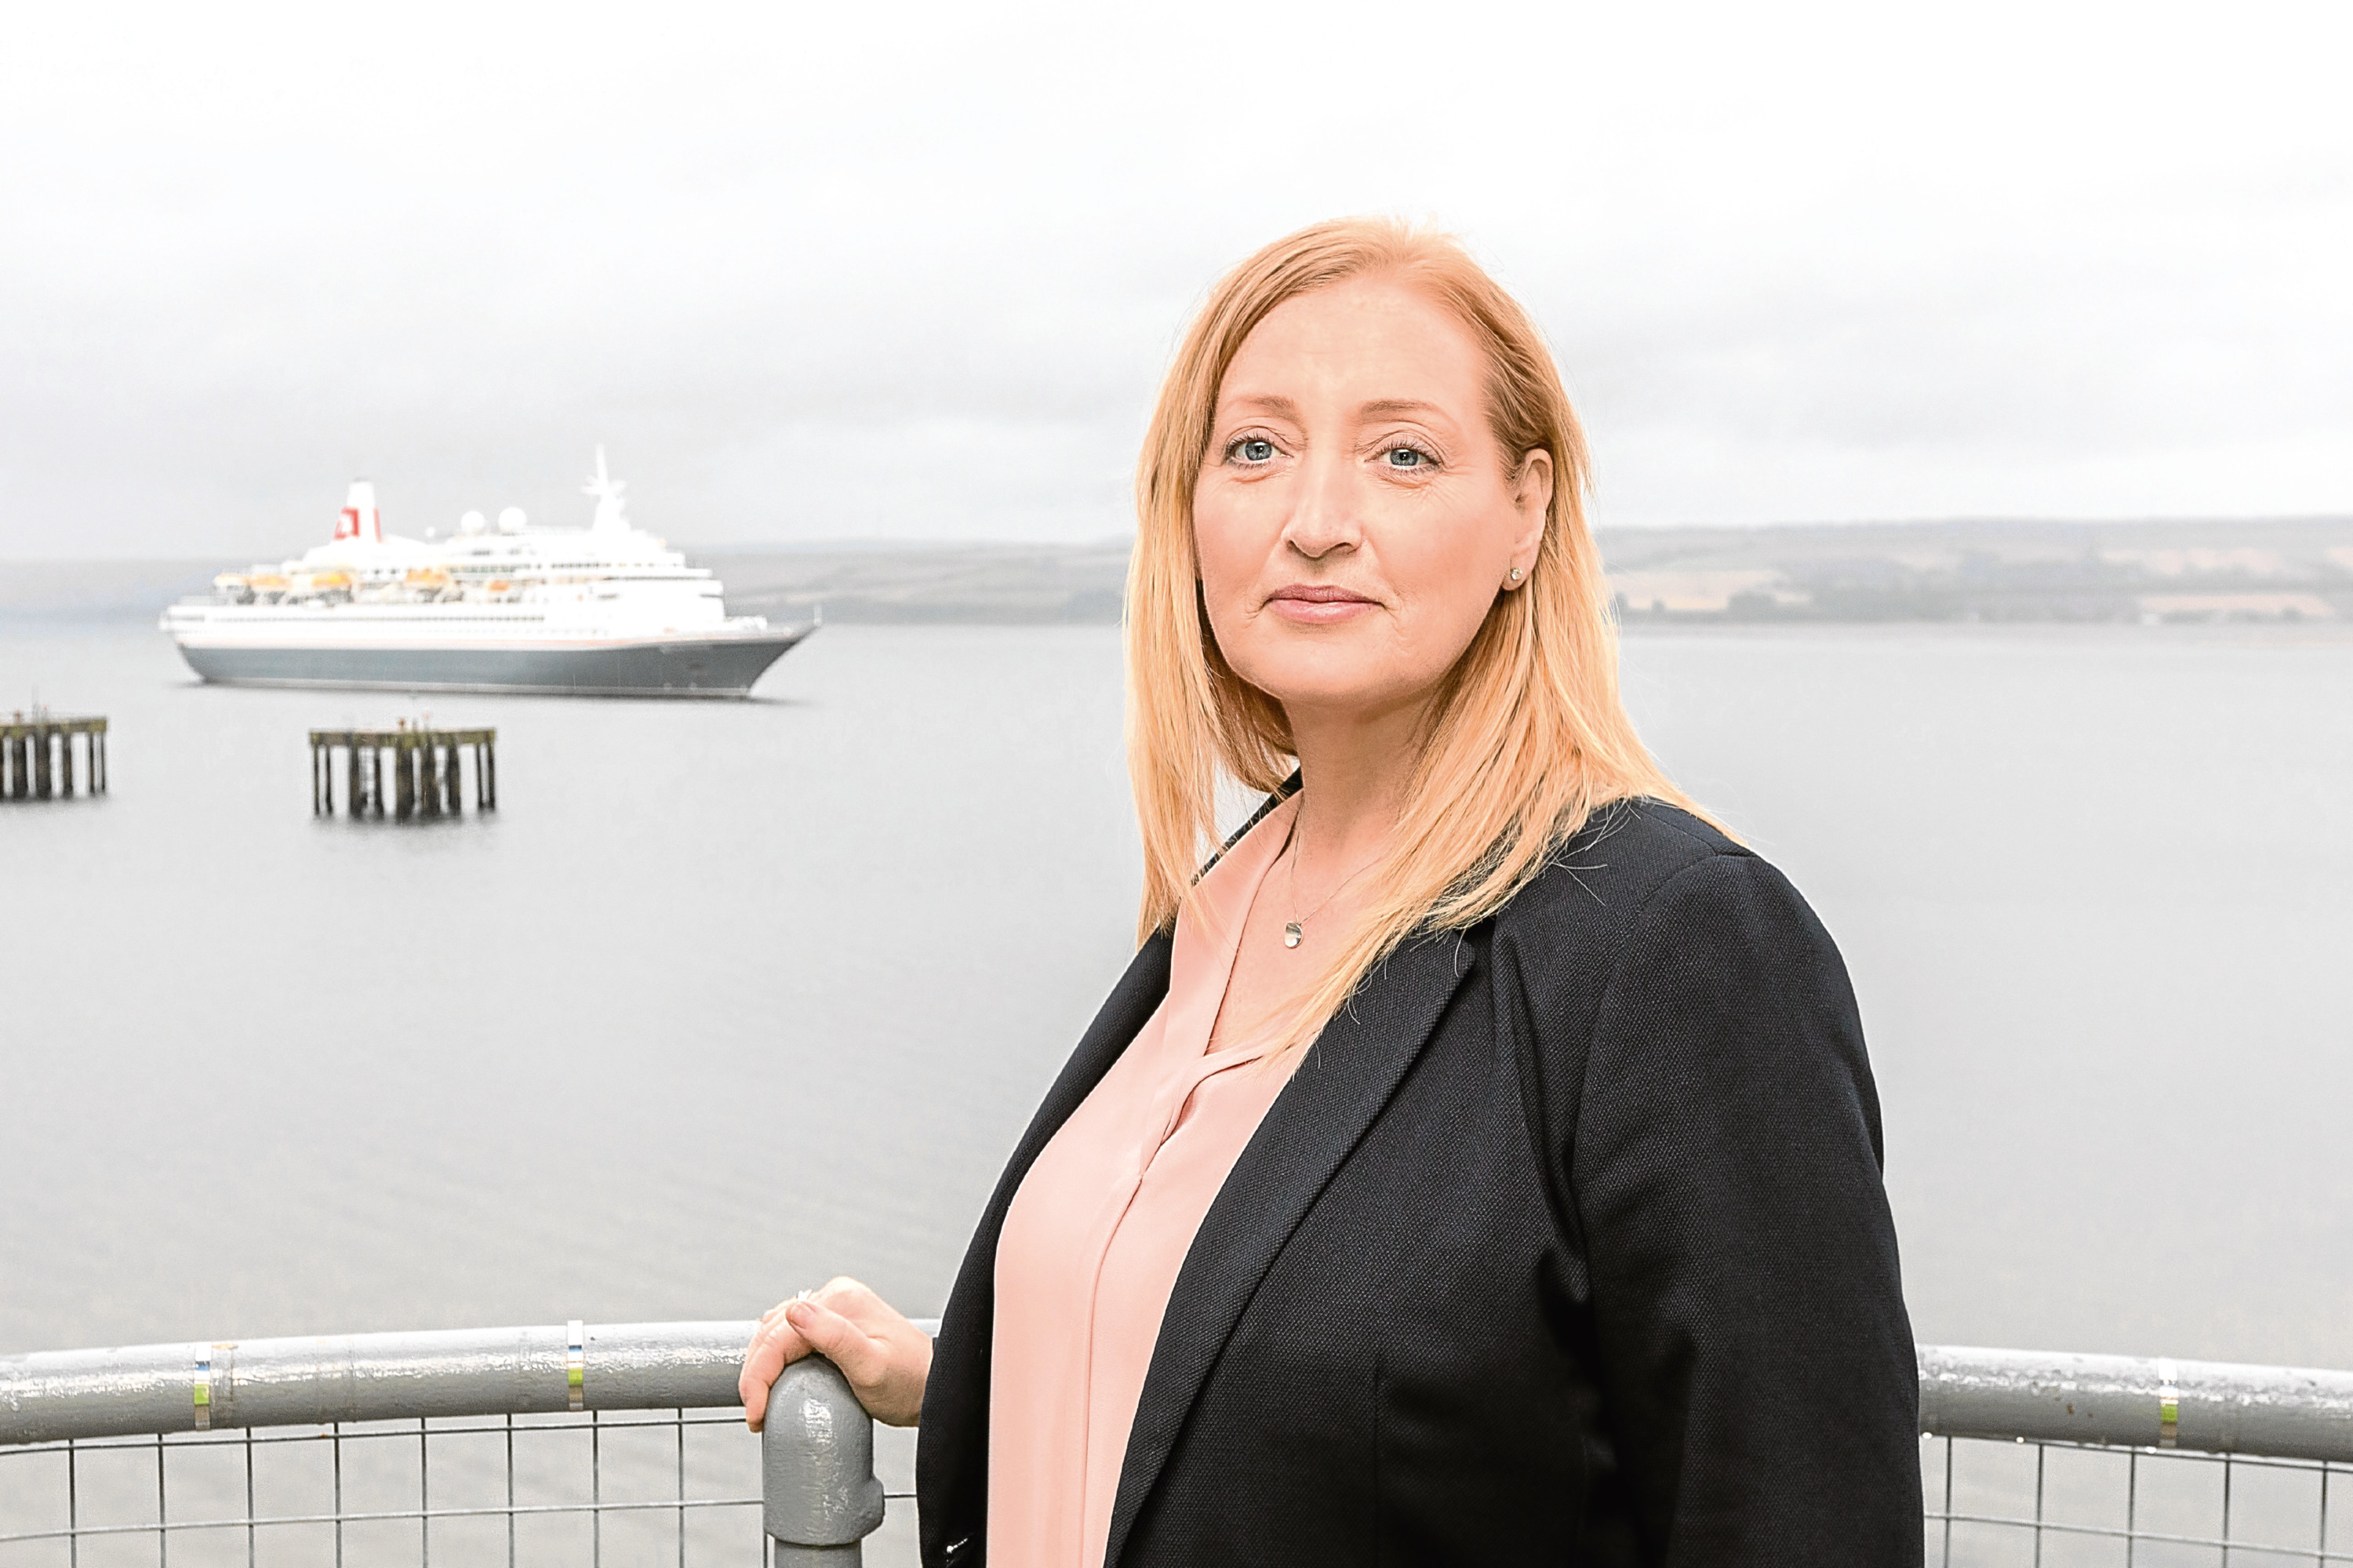 According to the Port of Cromarty Firth (PCF), which is responsible for the liner business in the area, an estimated total of 170,000 passengers will bring a £17million boost to the Highland economy.